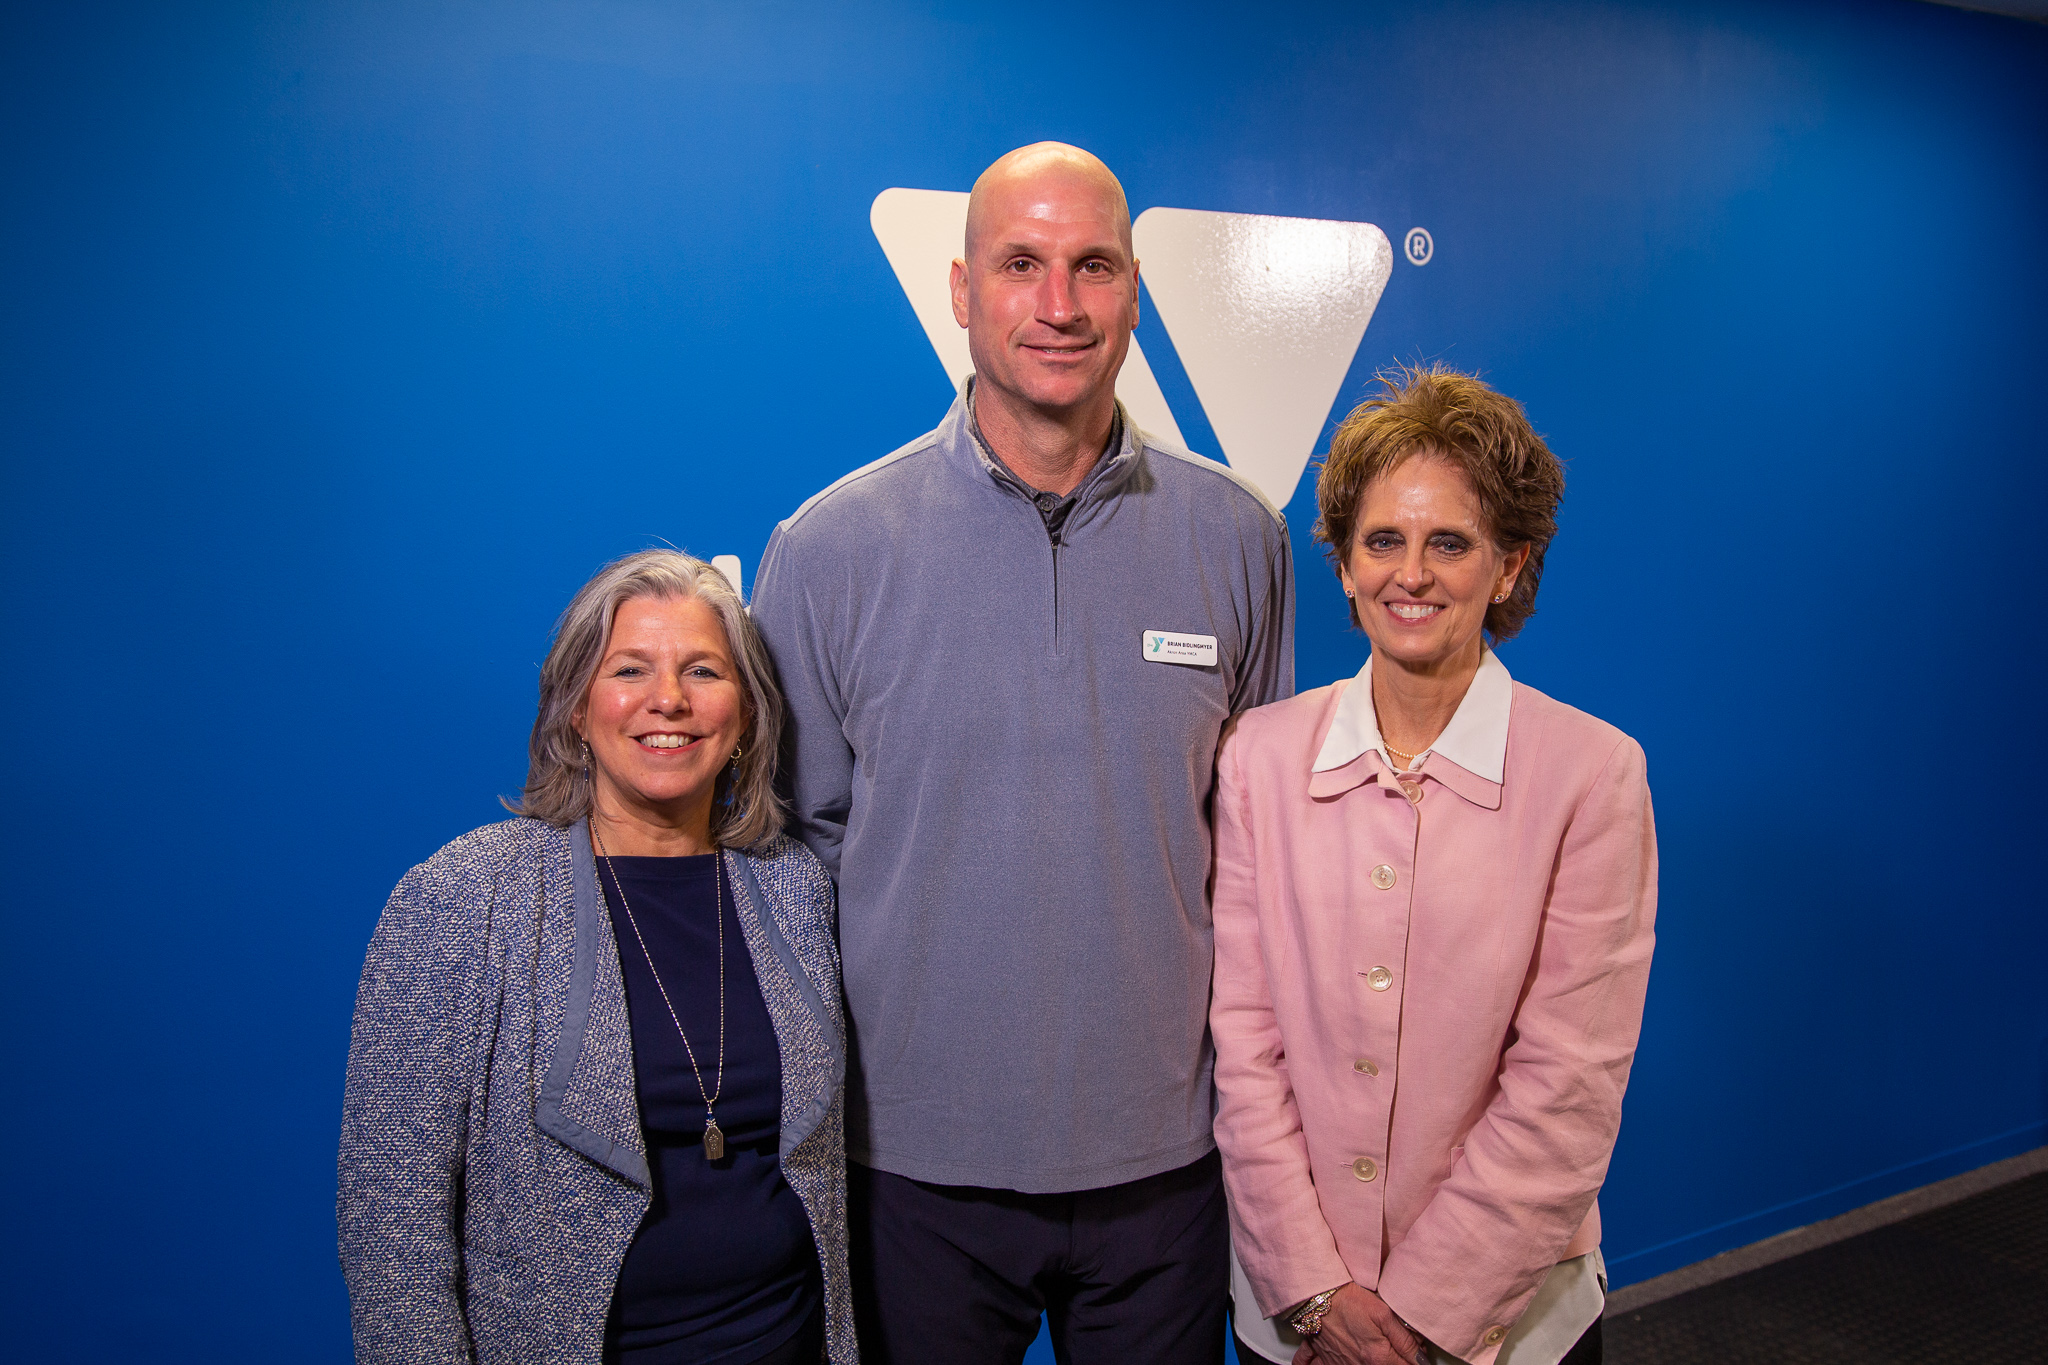 Domestic Relations Judge Katarina Cook and Magistrate Cheryl Wear pictured with the Akron Area YMCA’s Chief Development Officer Brian Bidlingmyer